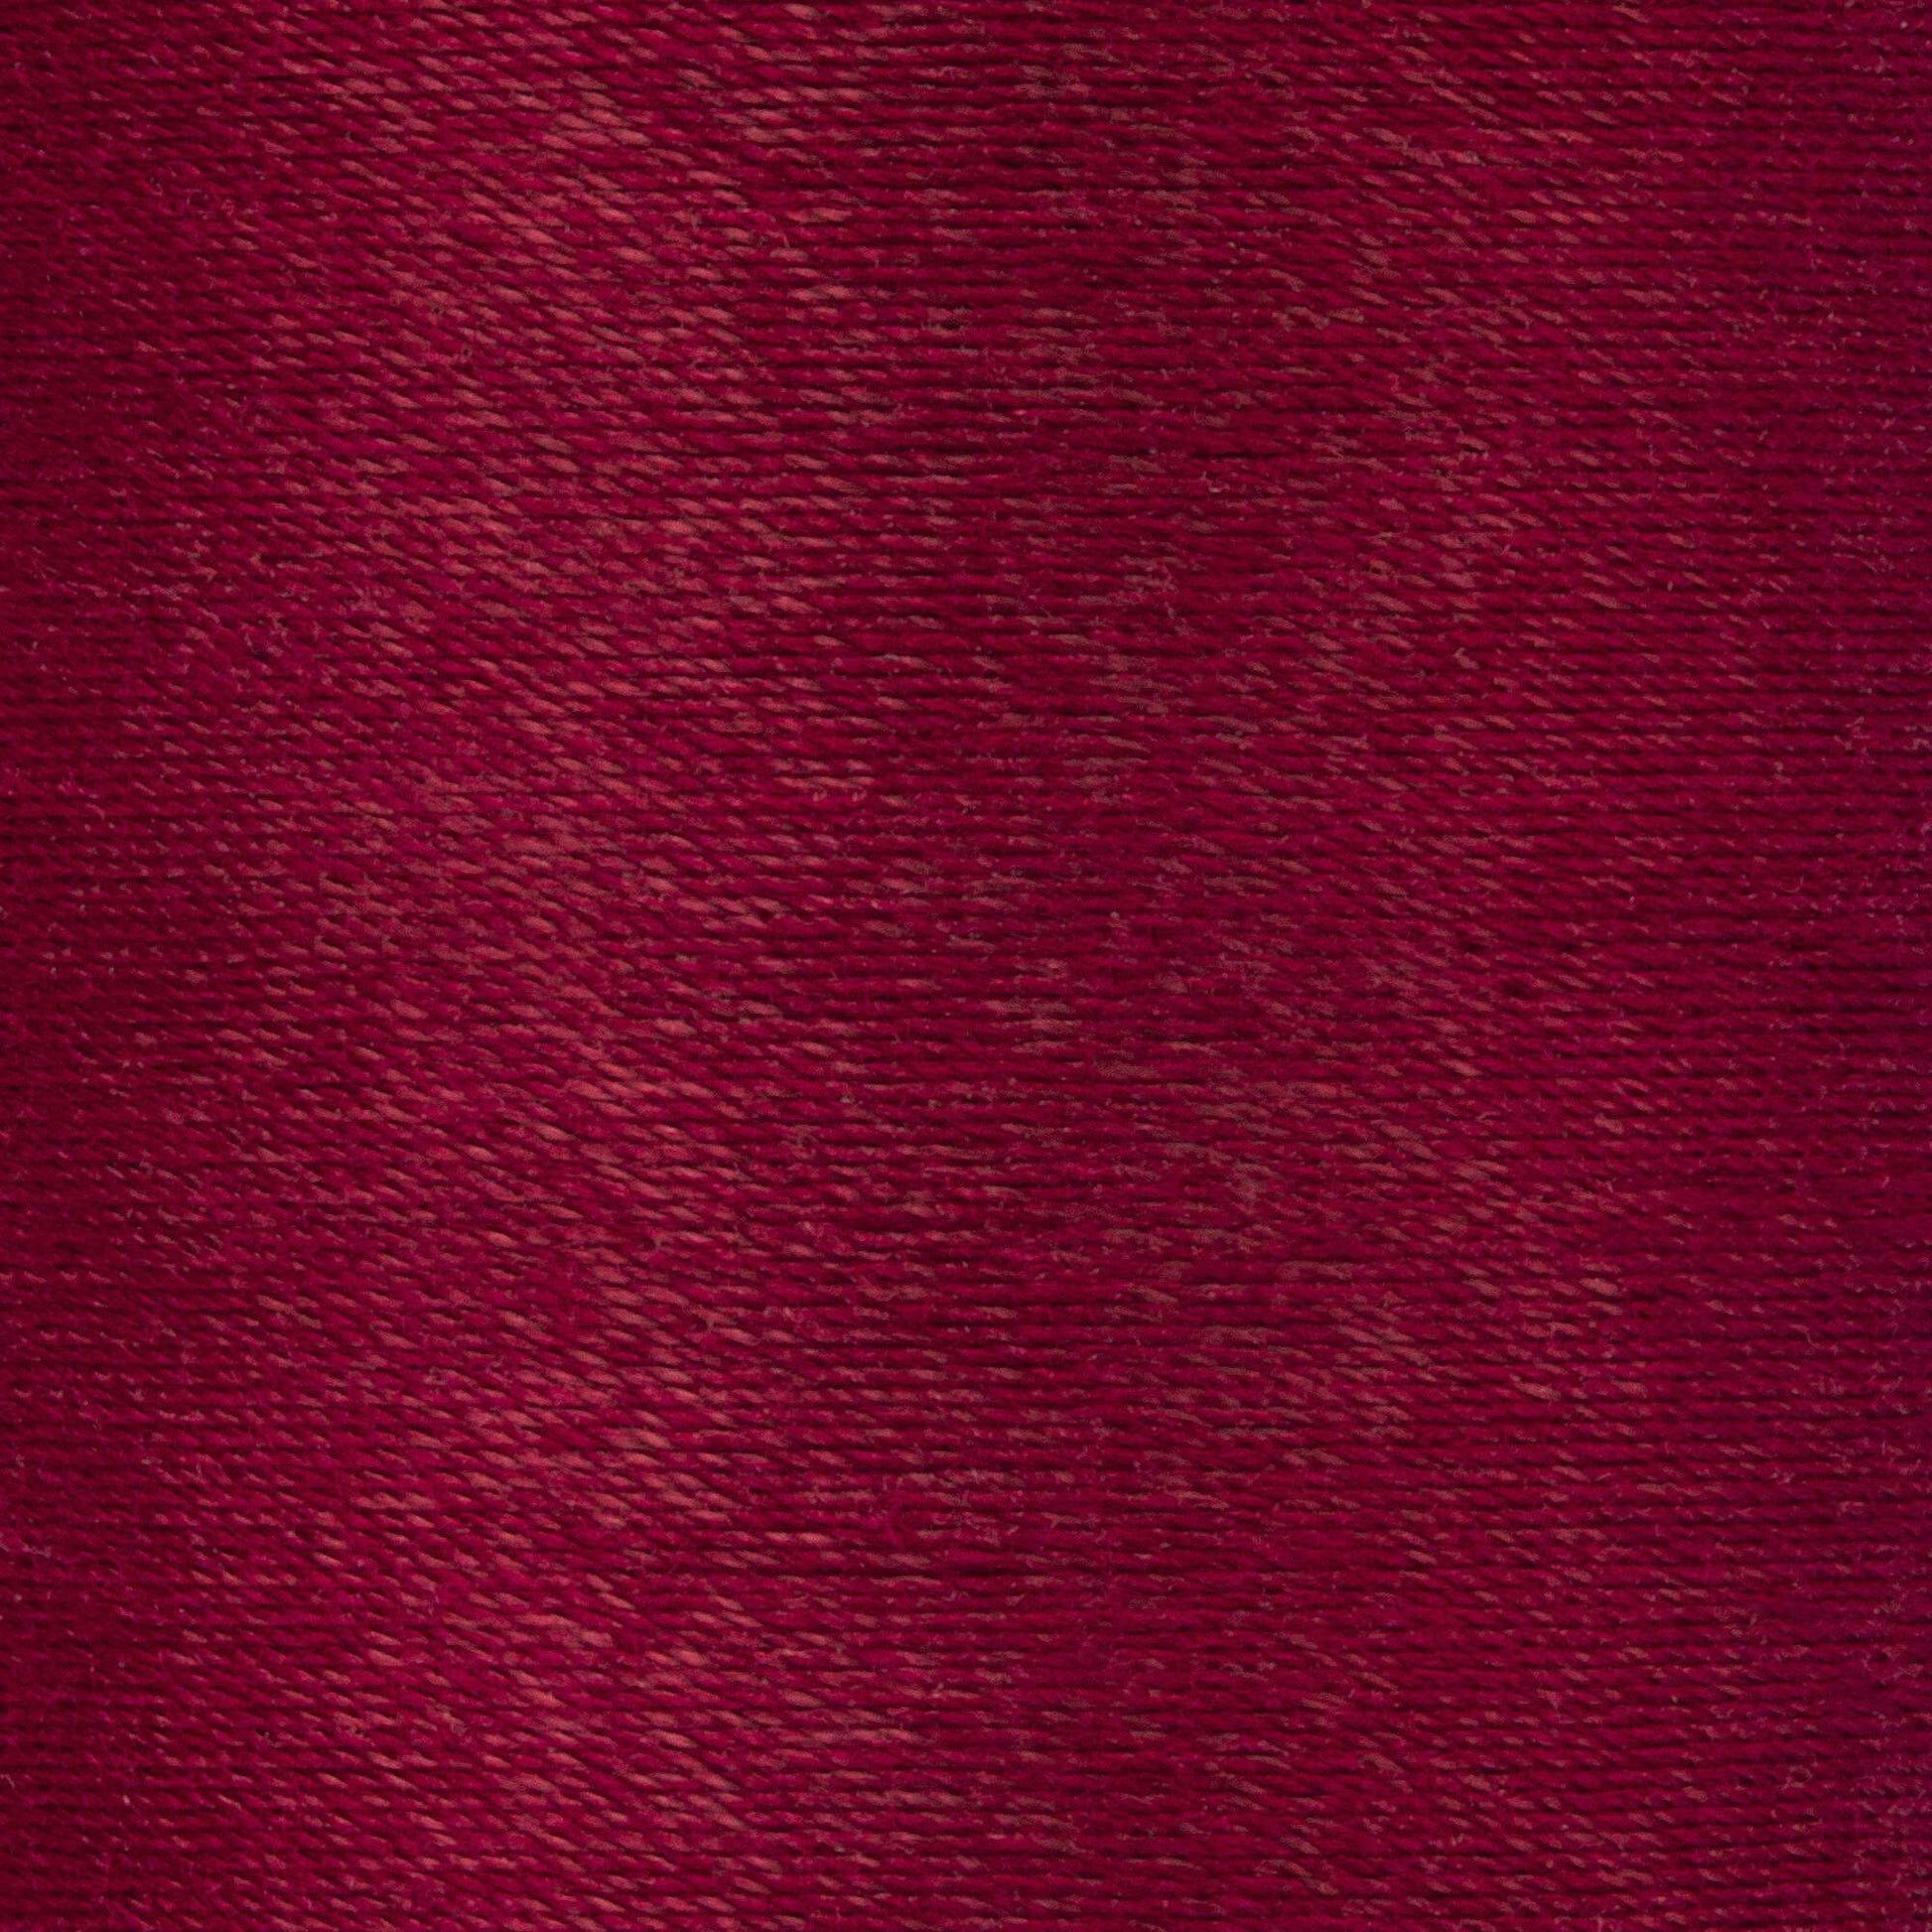 Coats & Clark Cotton Covered Quilting & Piecing Thread (250 Yards) Barberry Red